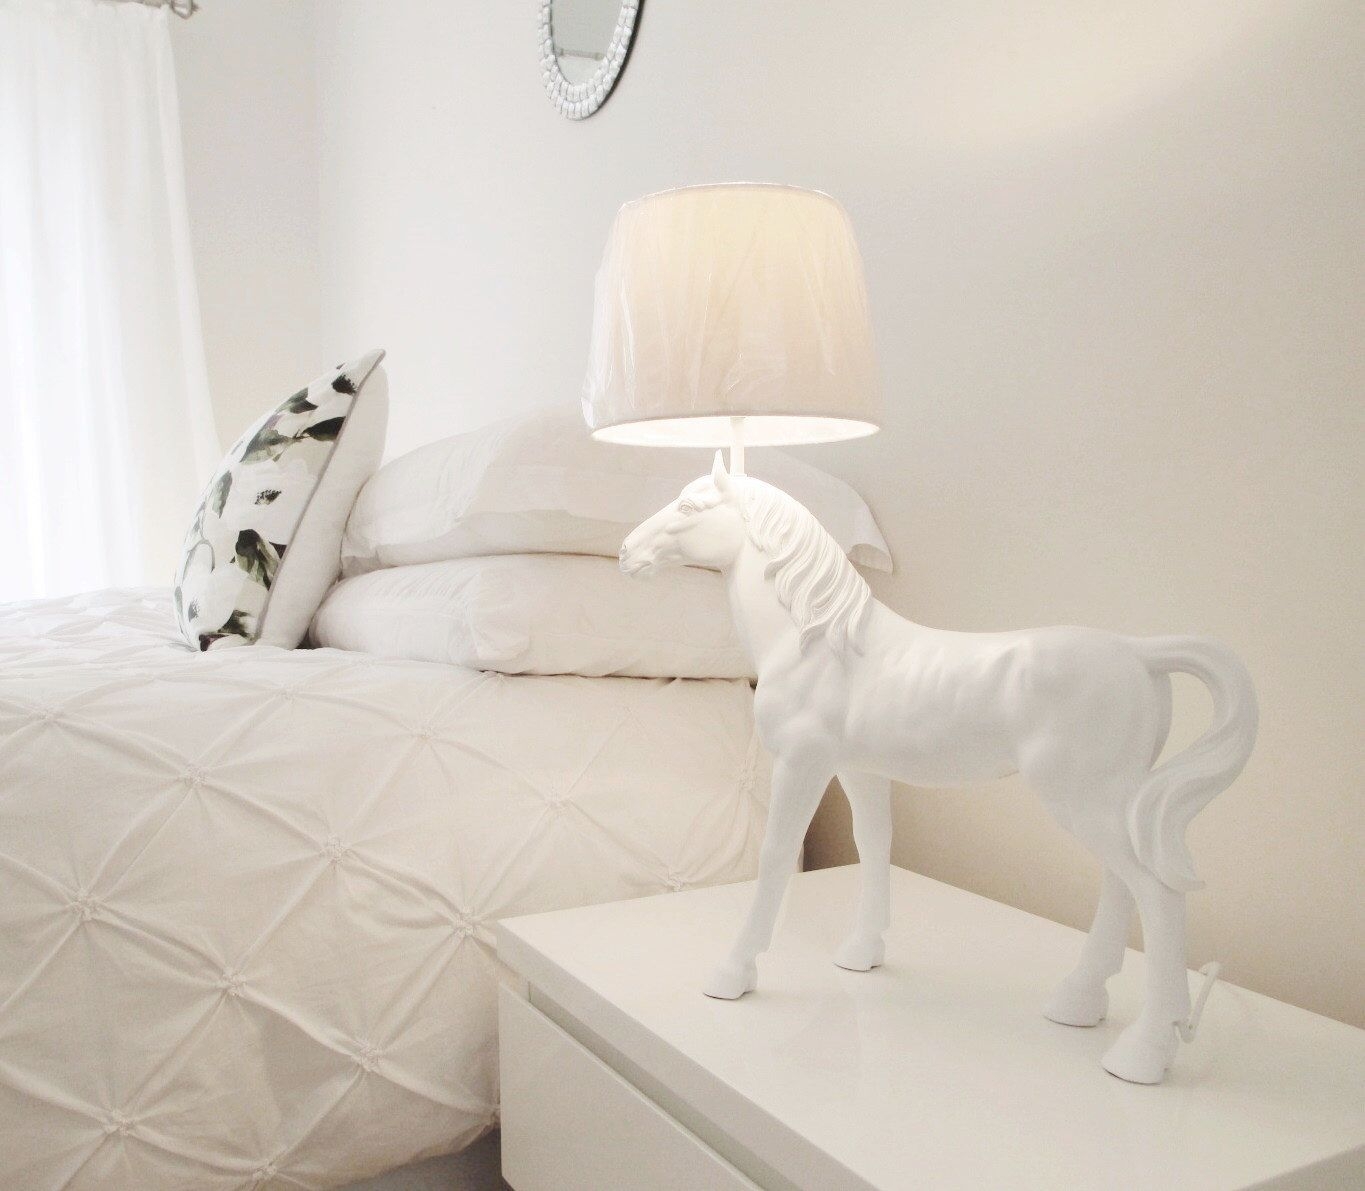 Horse lamps 2